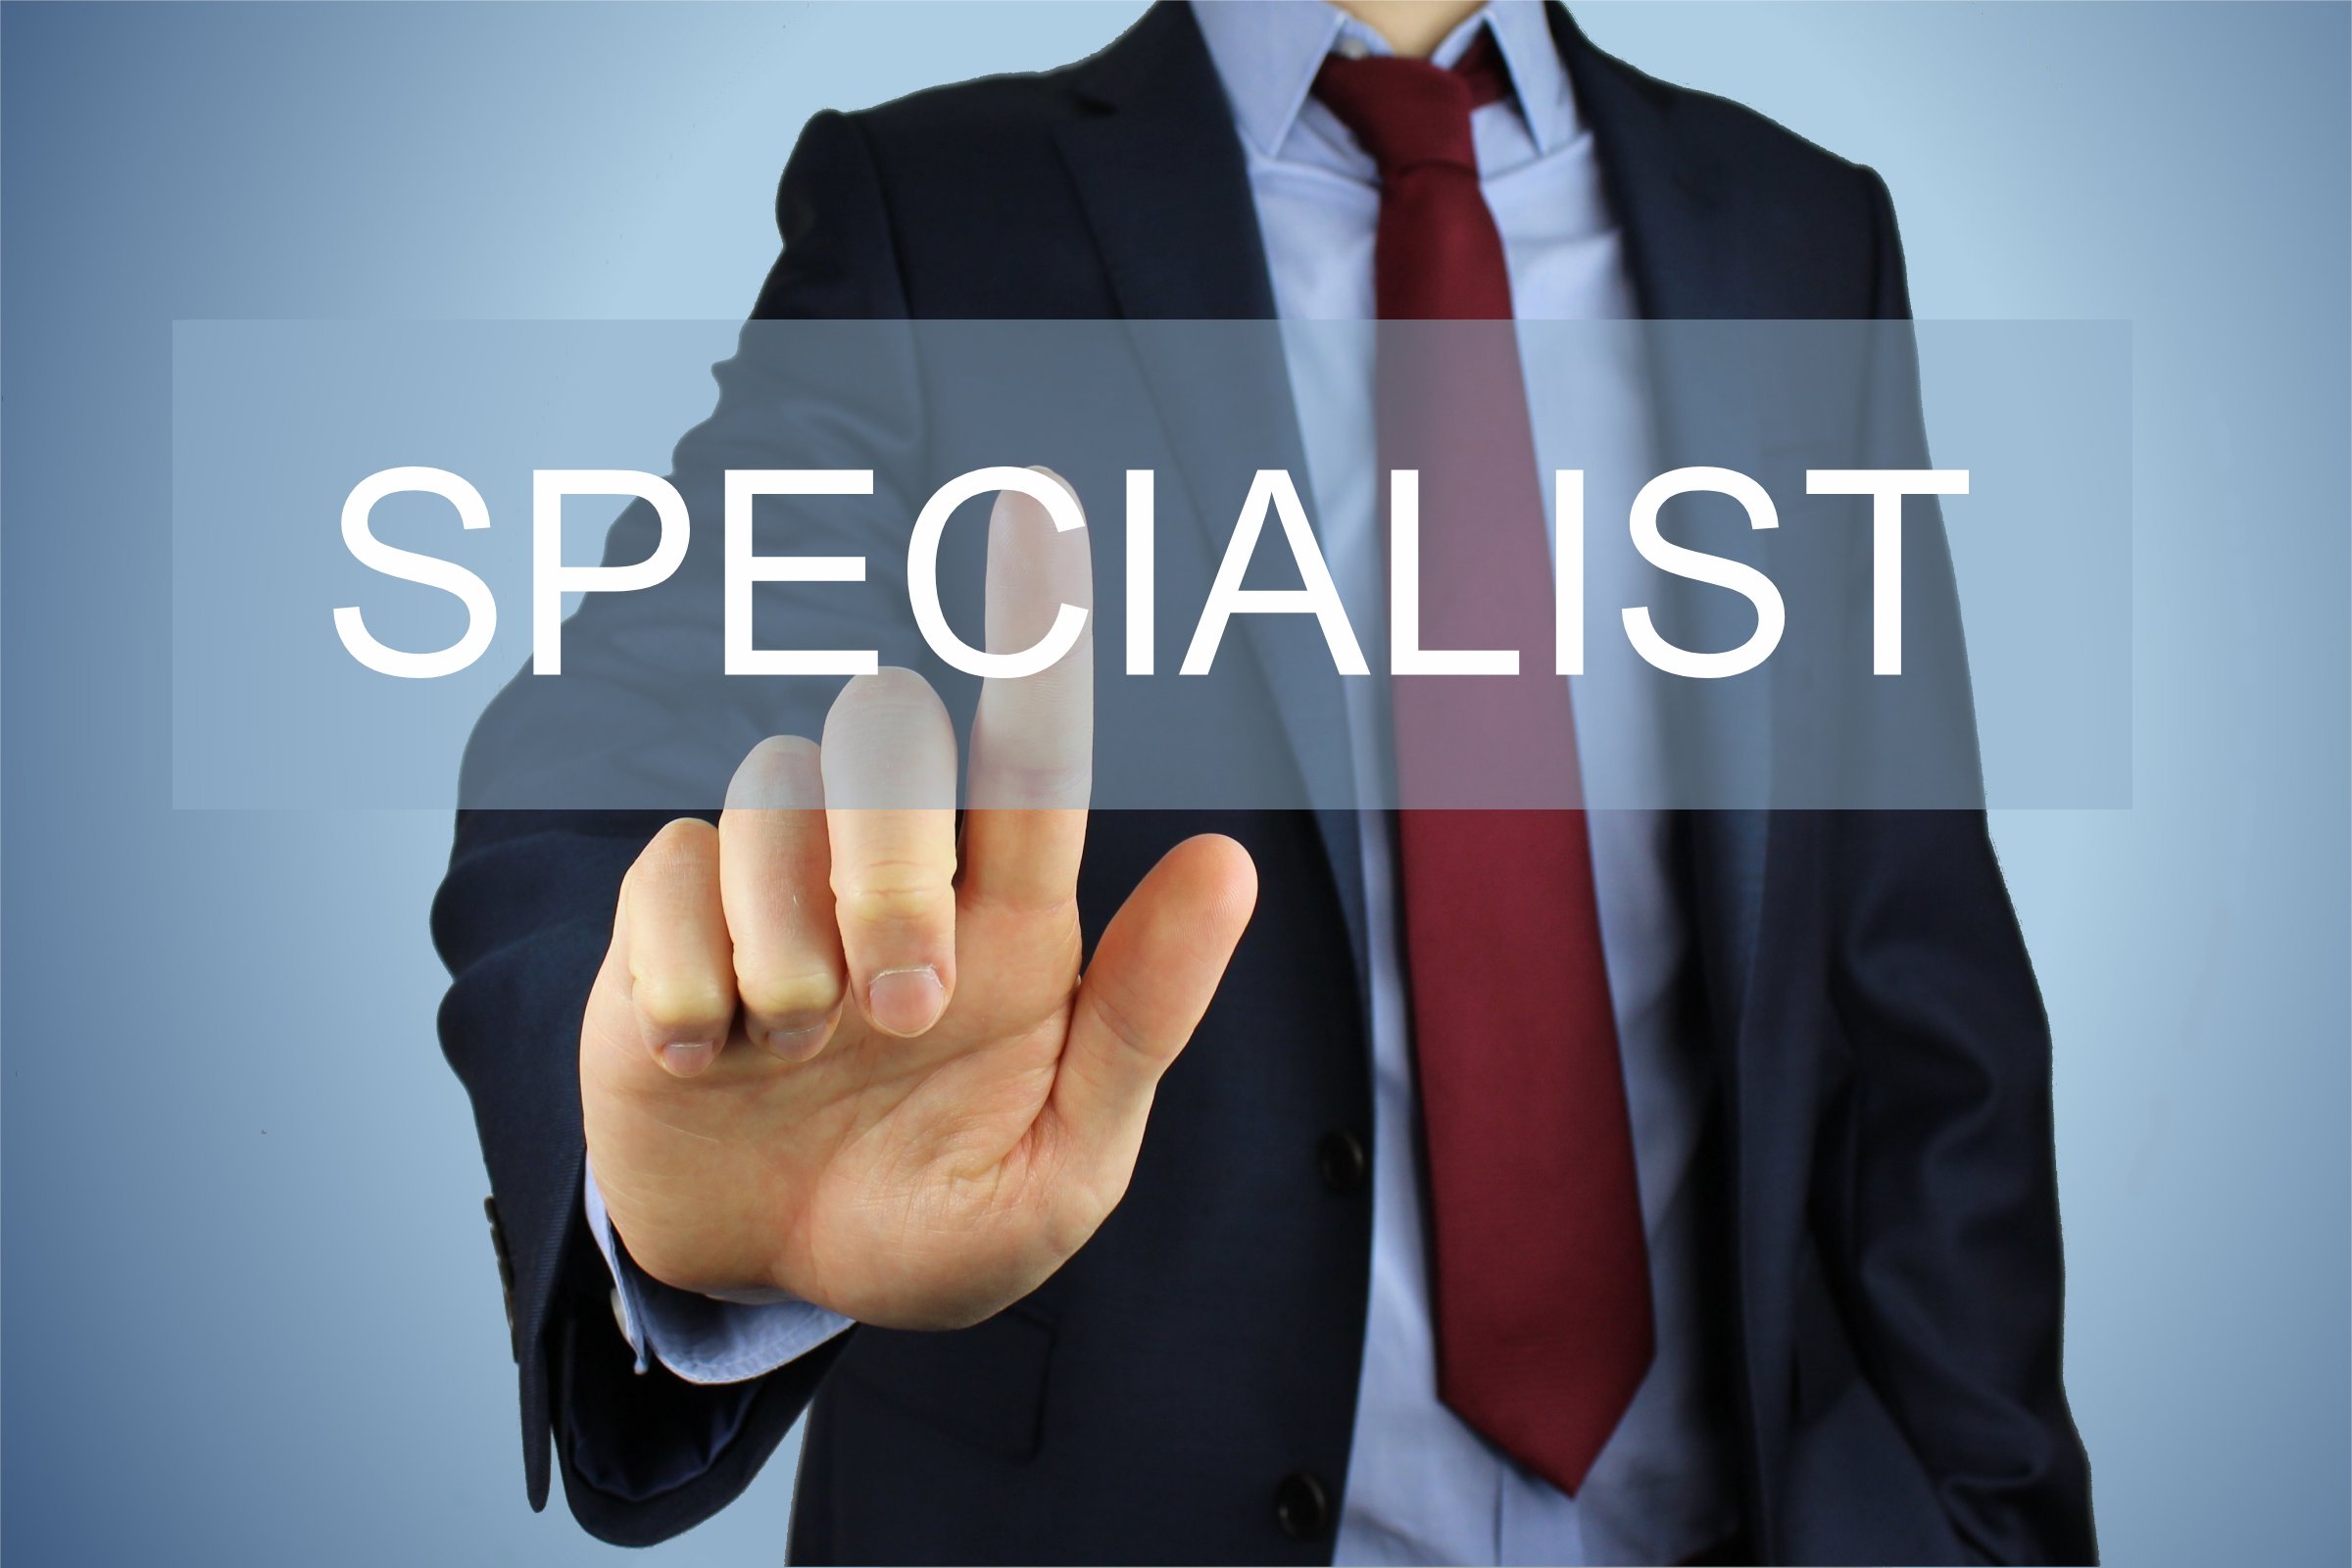 Specialist - Free of Charge Creative Commons Office worker pointing finger image